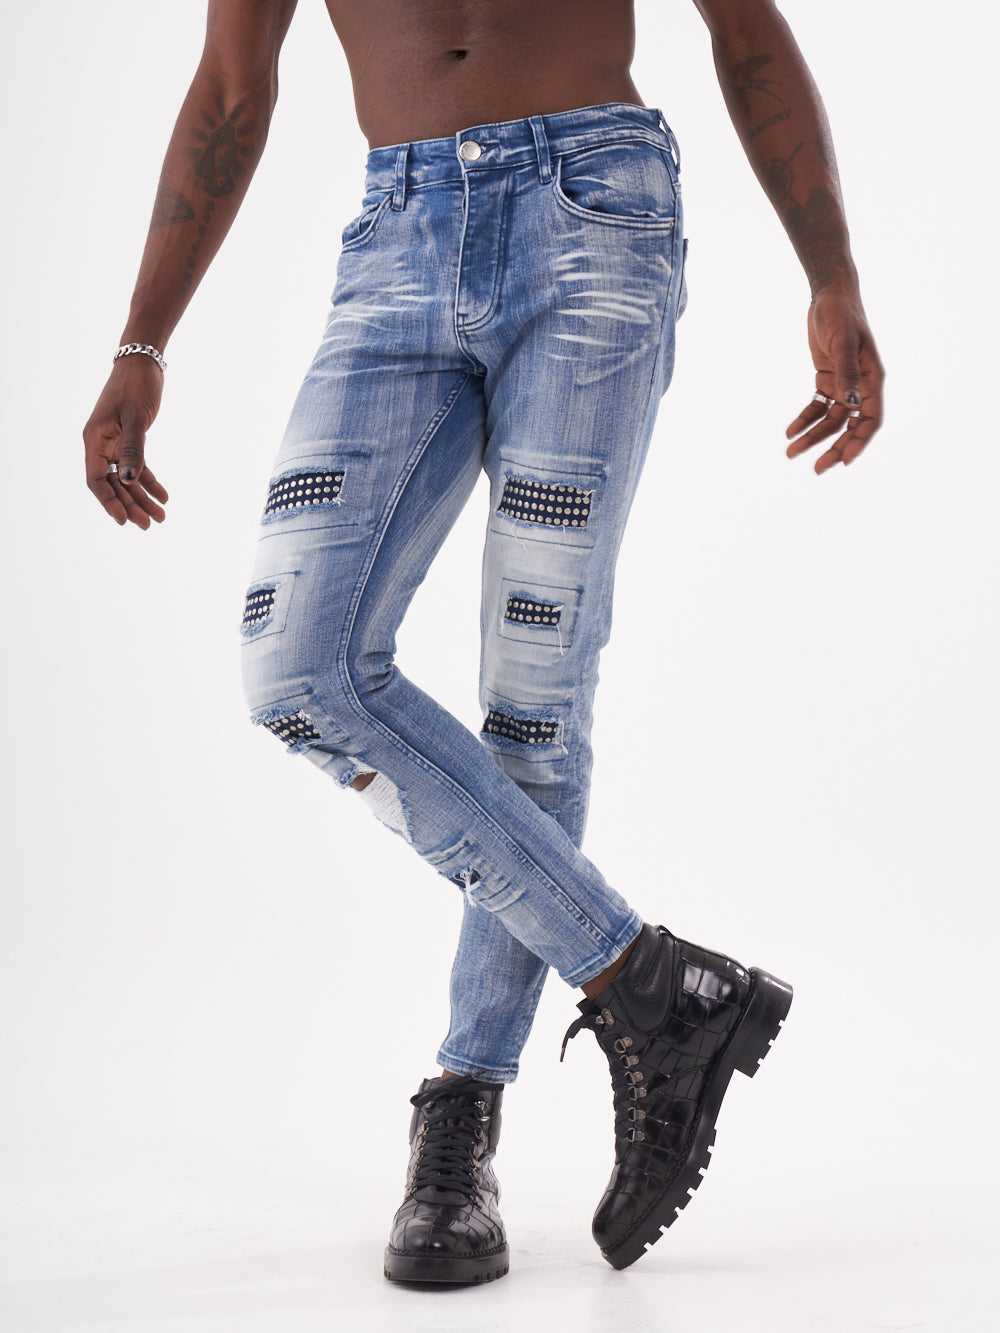 A man in ripped jeans standing on a white background, wearing the MUTANT.